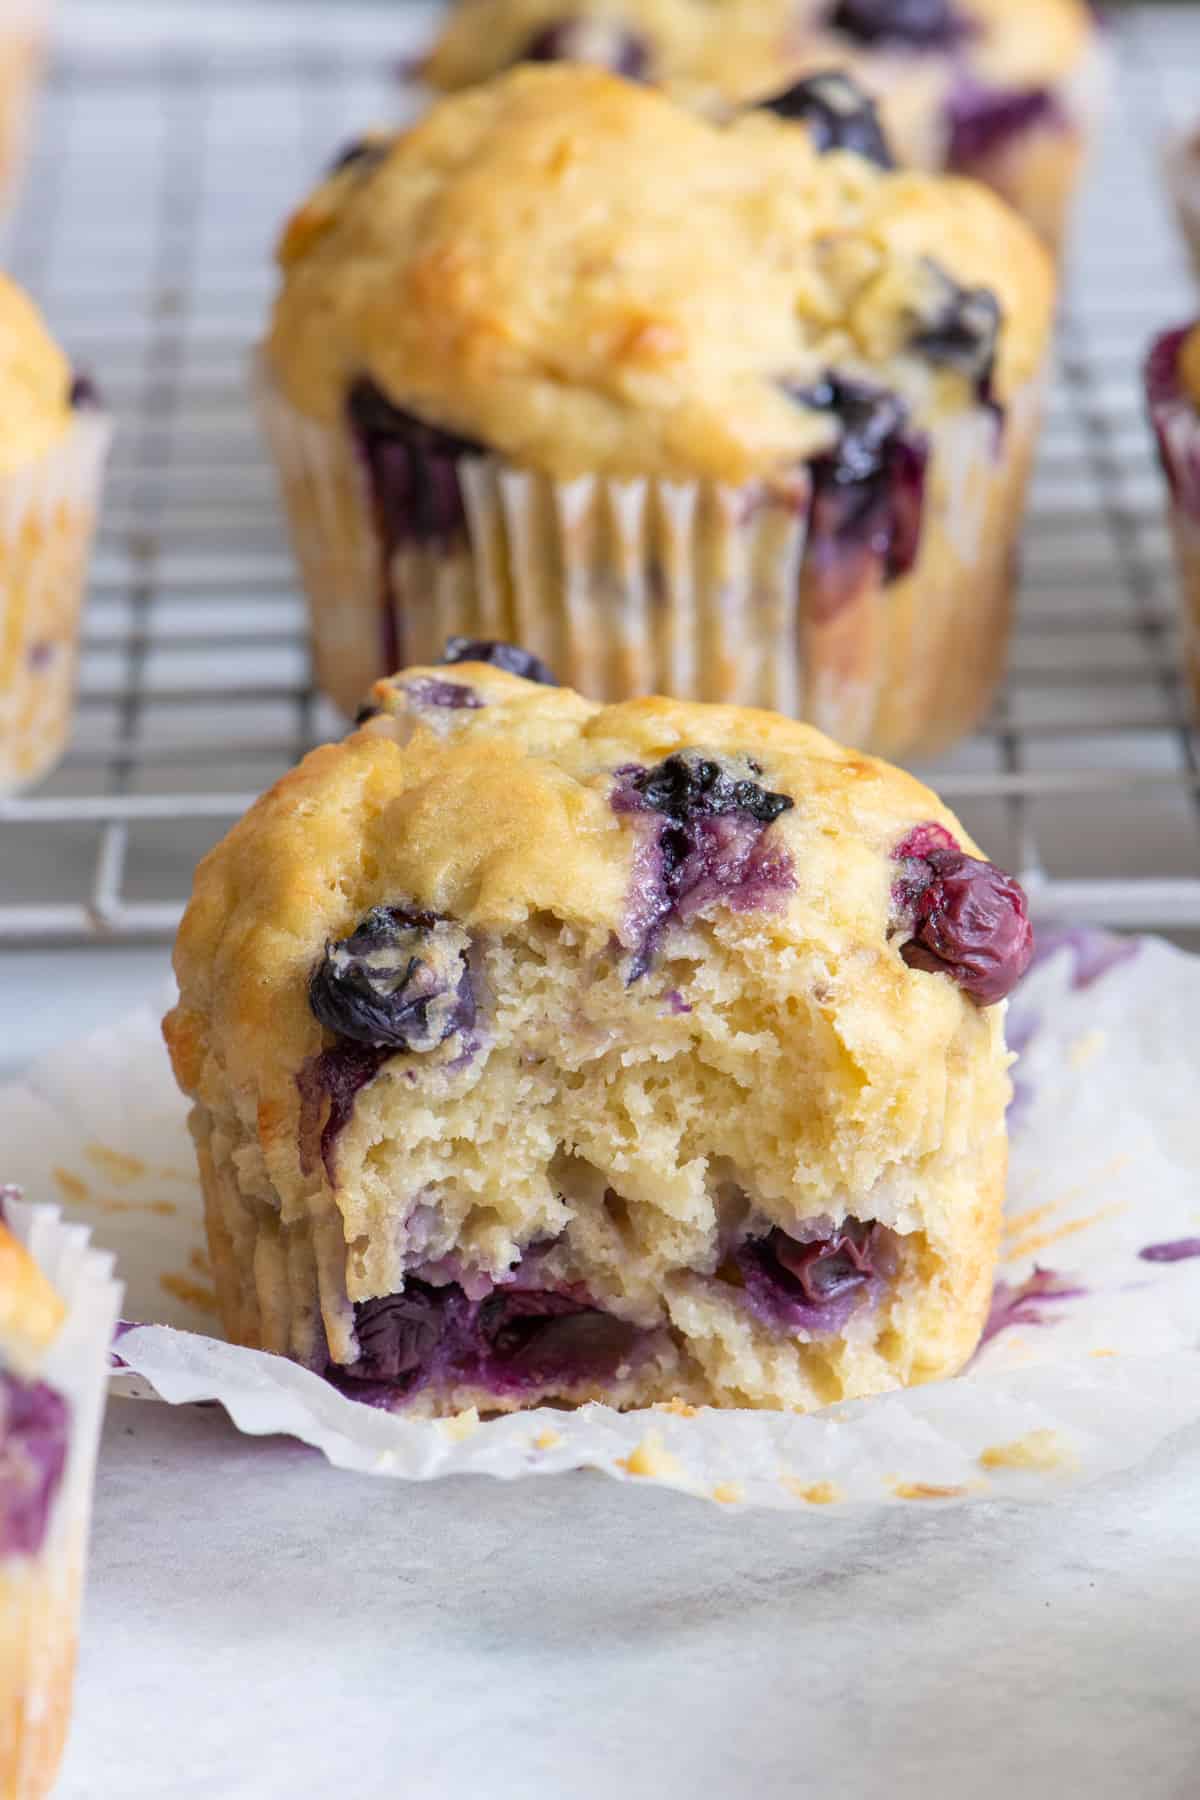 Close up of banana blueberry muffin with a bit taken out and more muffins around it.